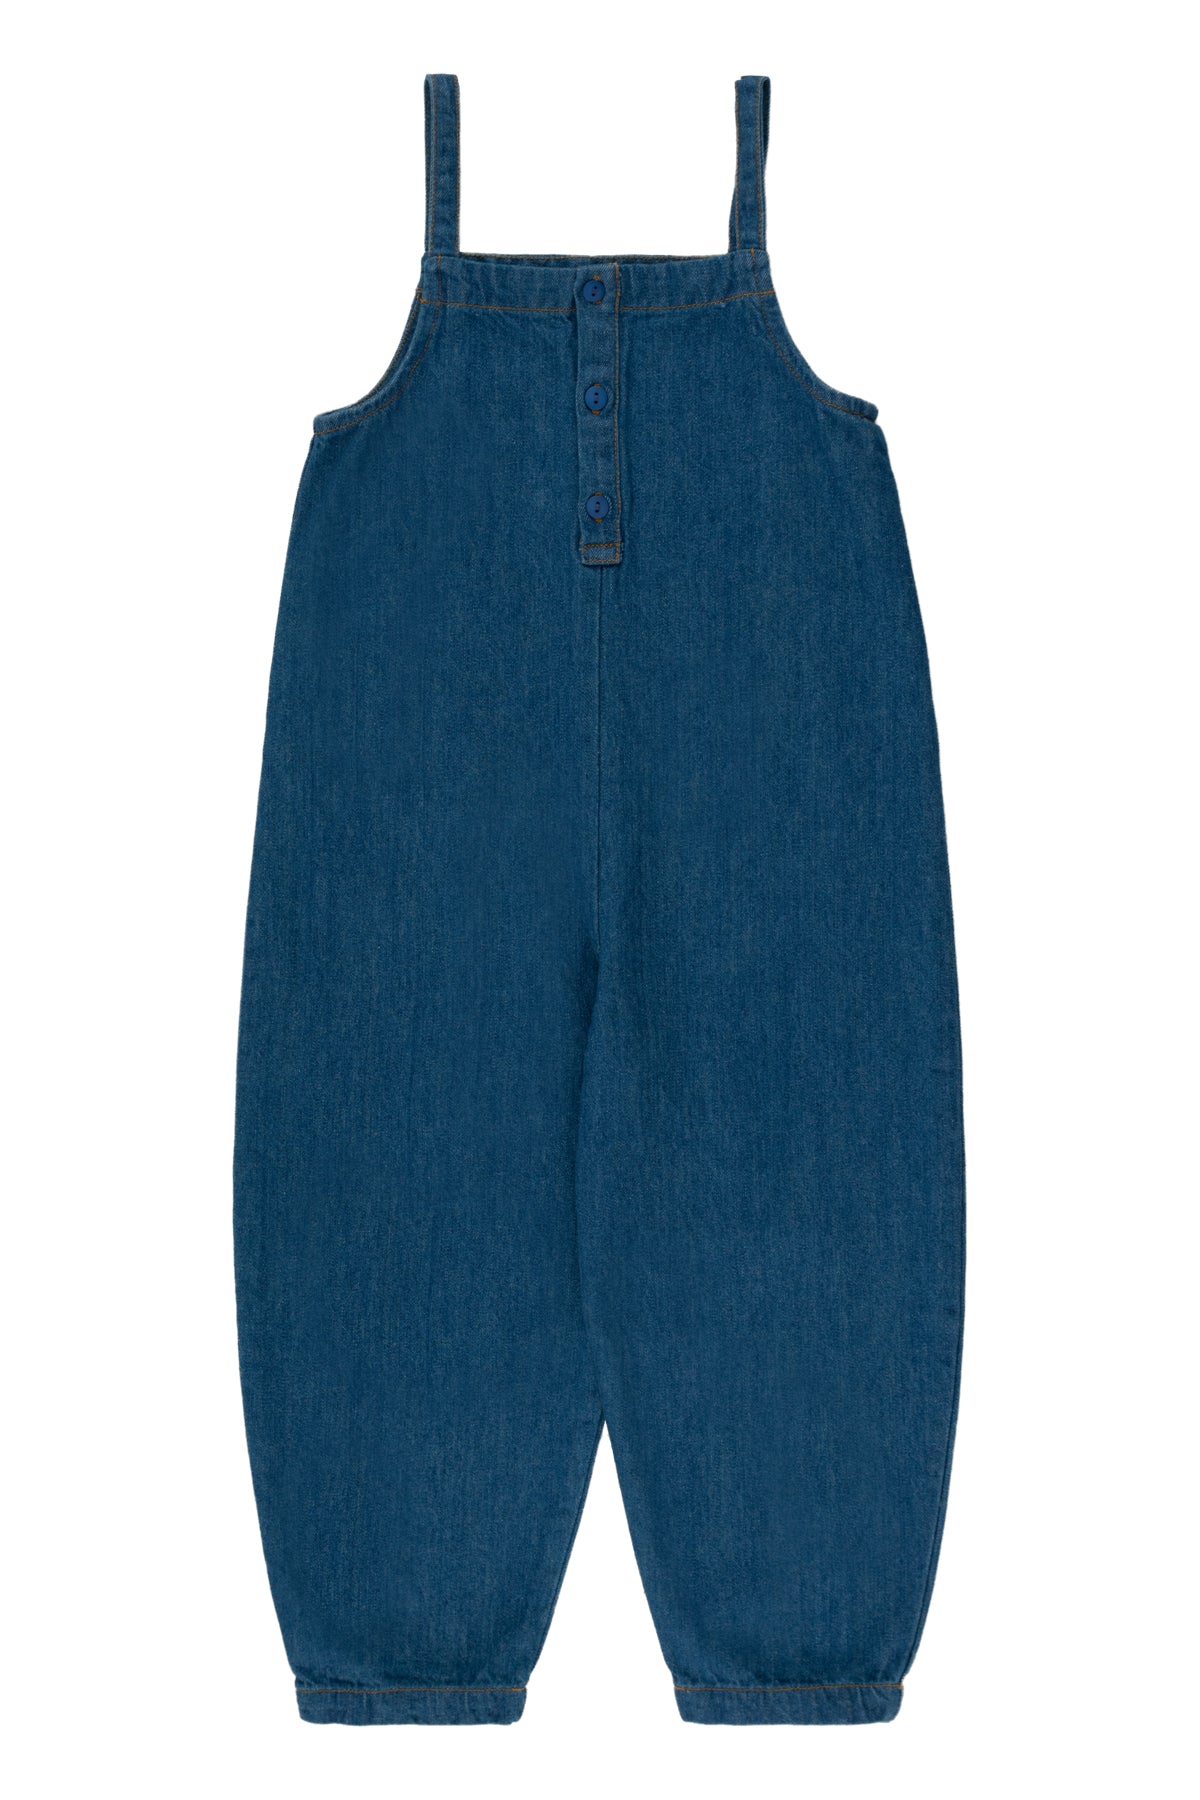 Tinycottons Solid Denim Dungaree